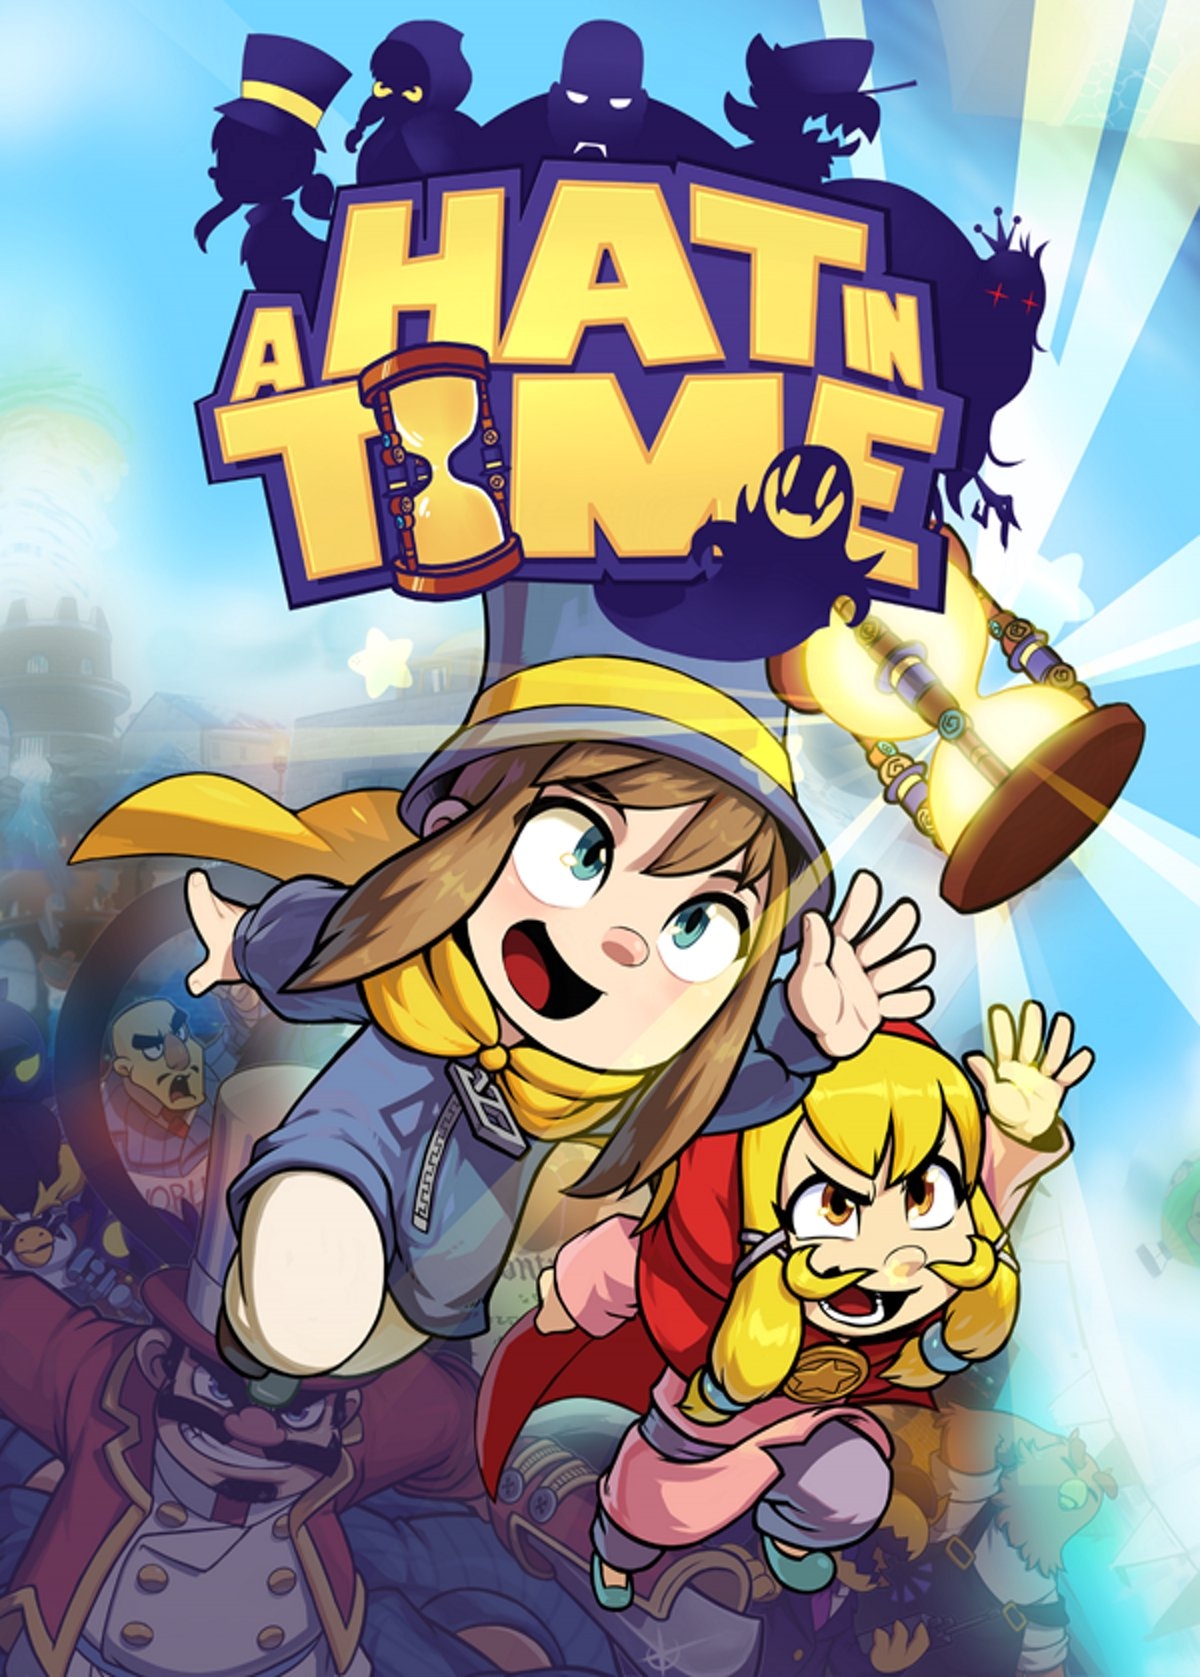 A Hat Time